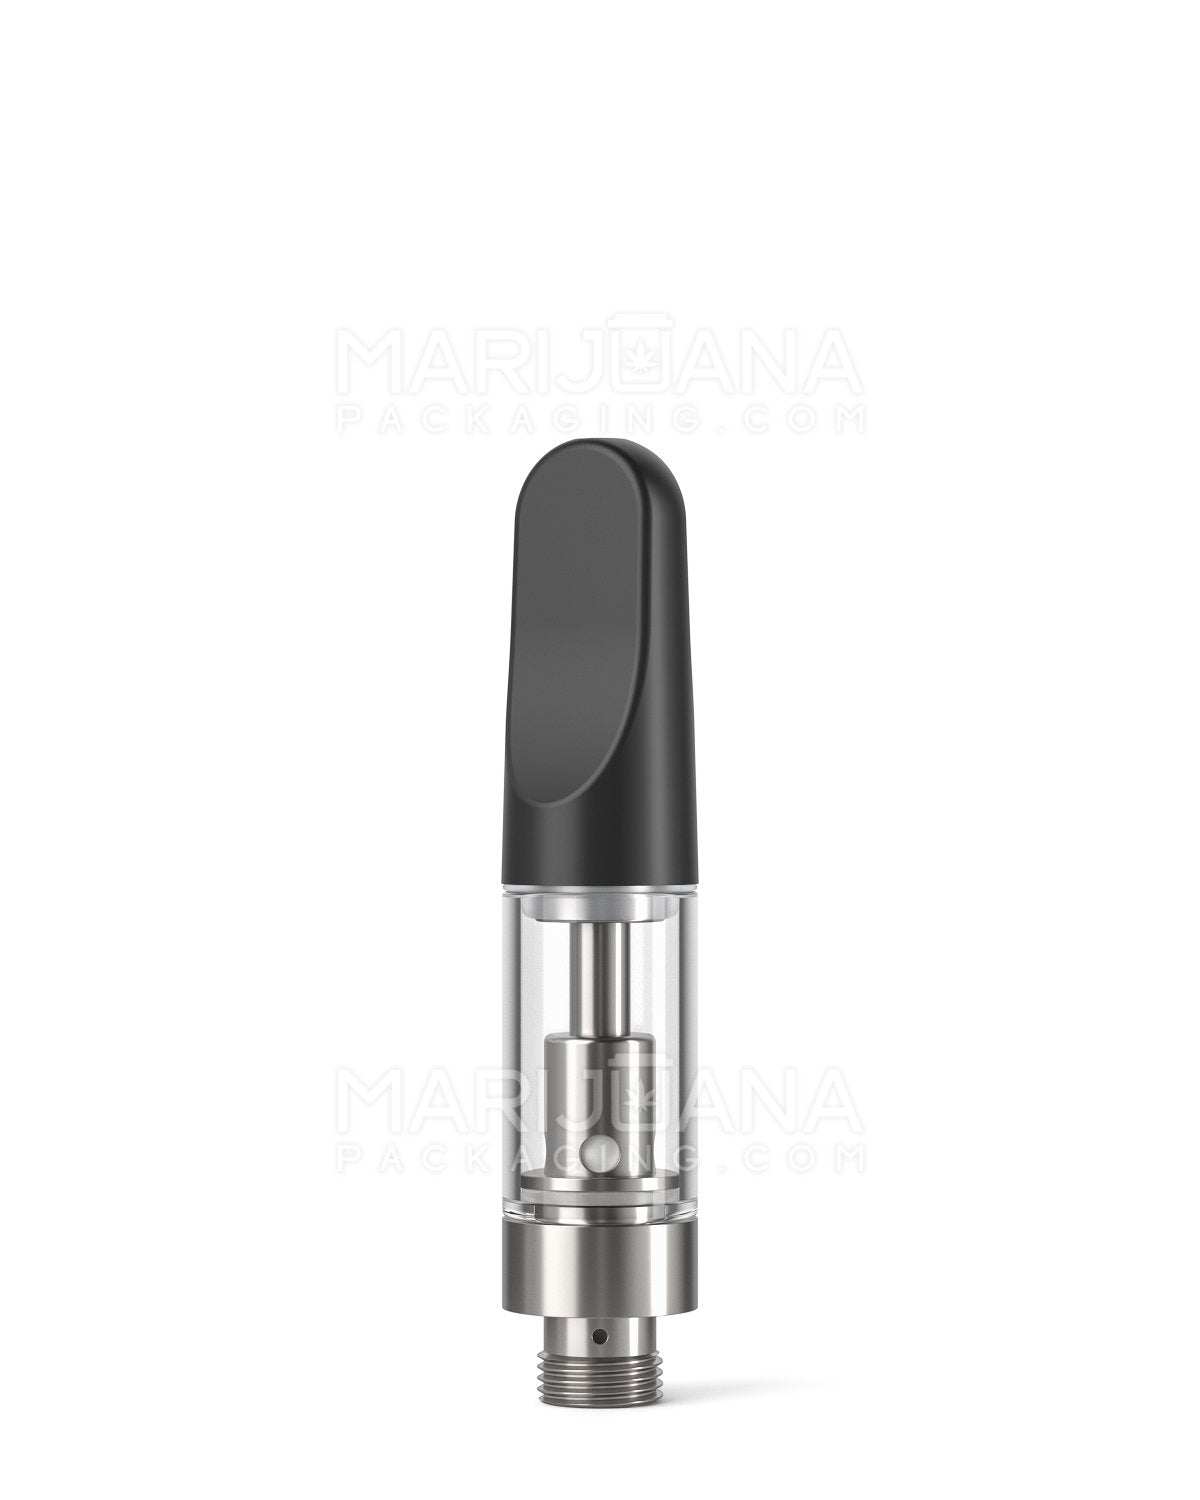 CCELL | Liquid6 Reactor Glass Cartridge with Black Plastic Mouthpiece | 0.5mL - Screw On | Sample - 1